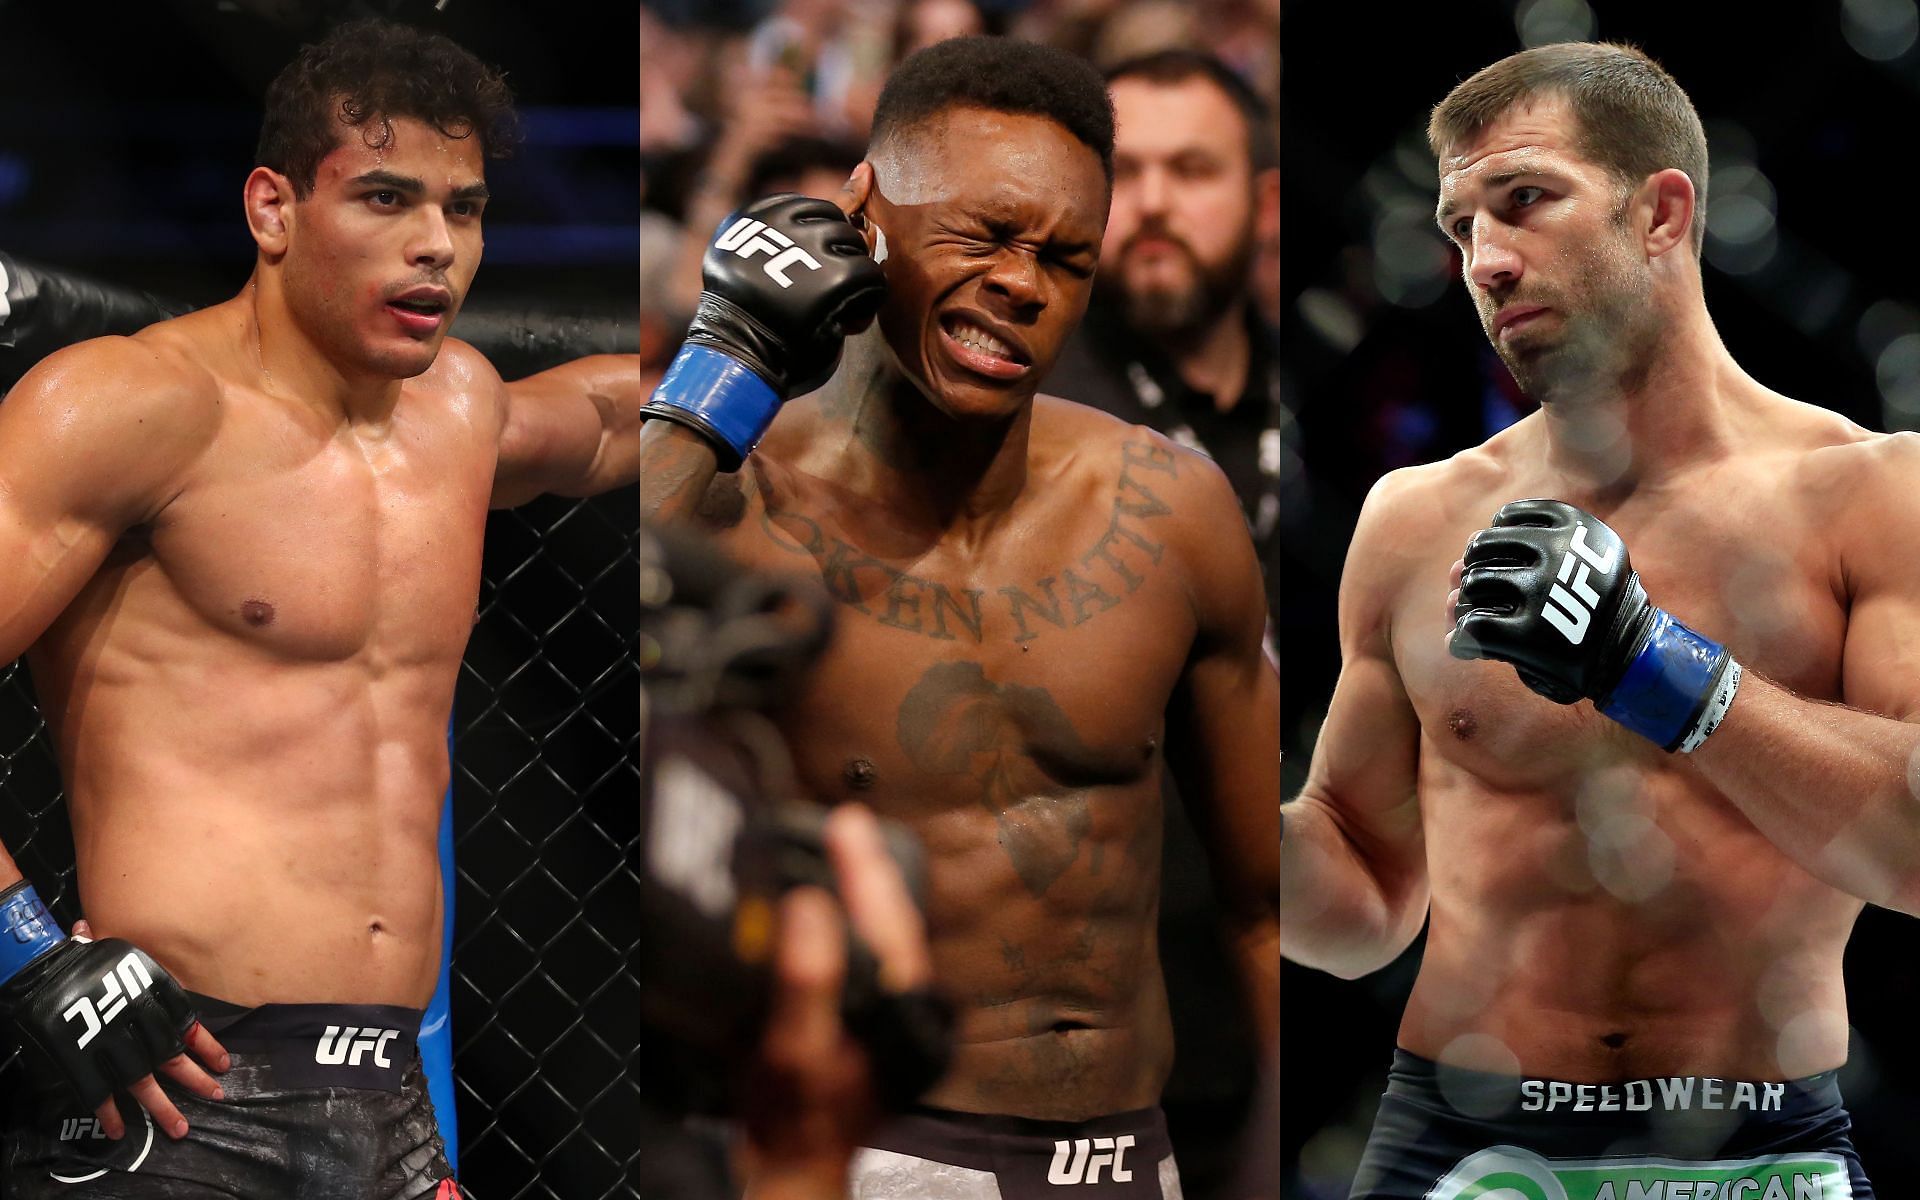 Paulo Costa (left), Israel Adesanya (center), and Luke Rockhold (right) (Images via Getty)